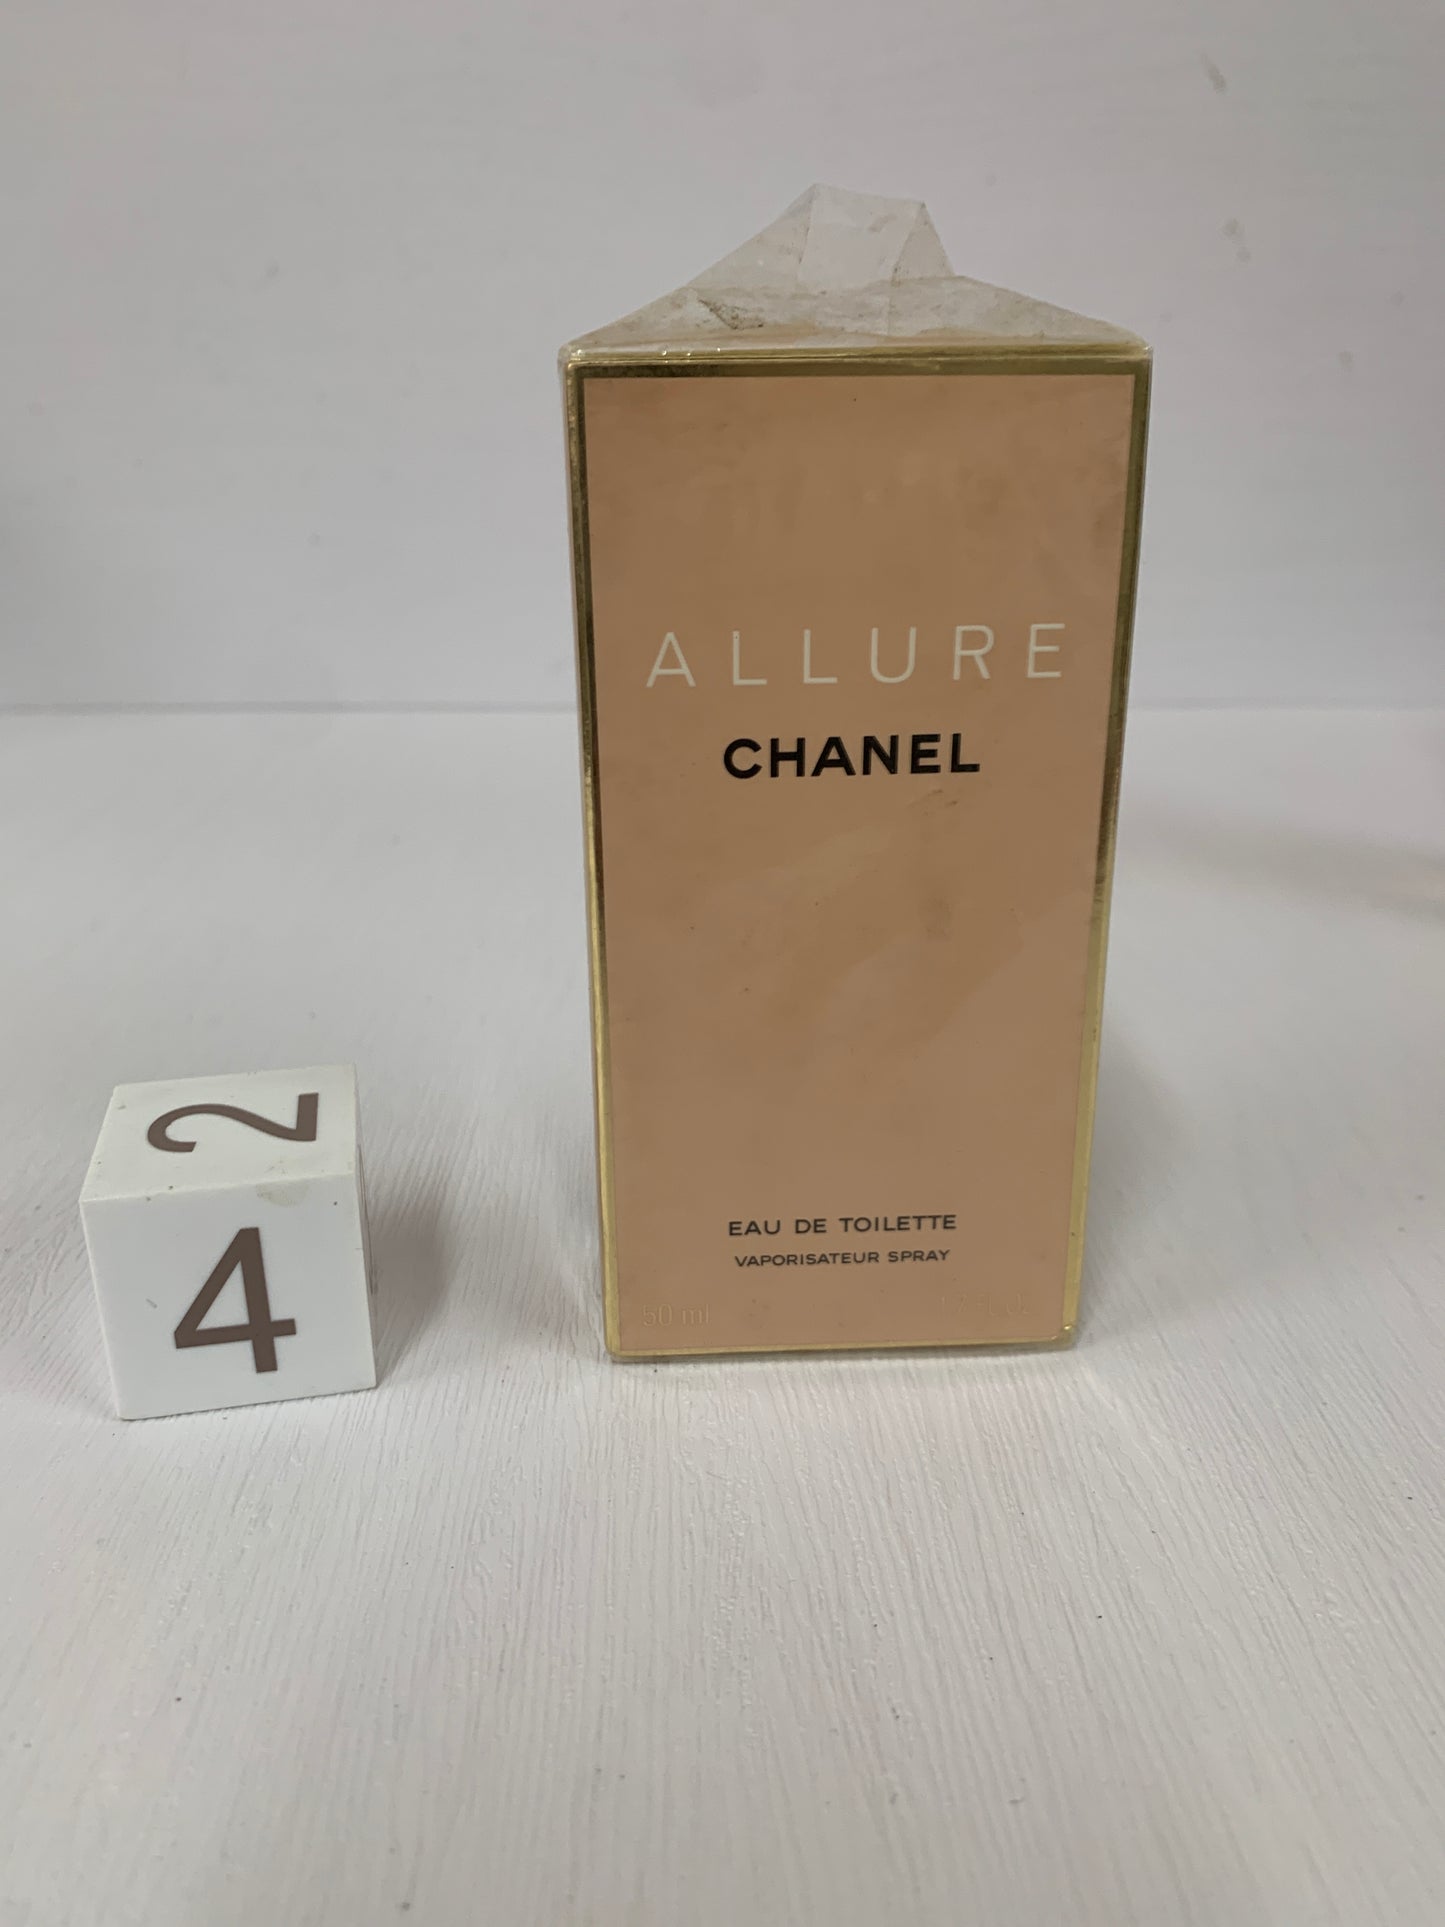 Used Chanel Chance Allure 50ml No.5 100ml EDT   - 25Mar